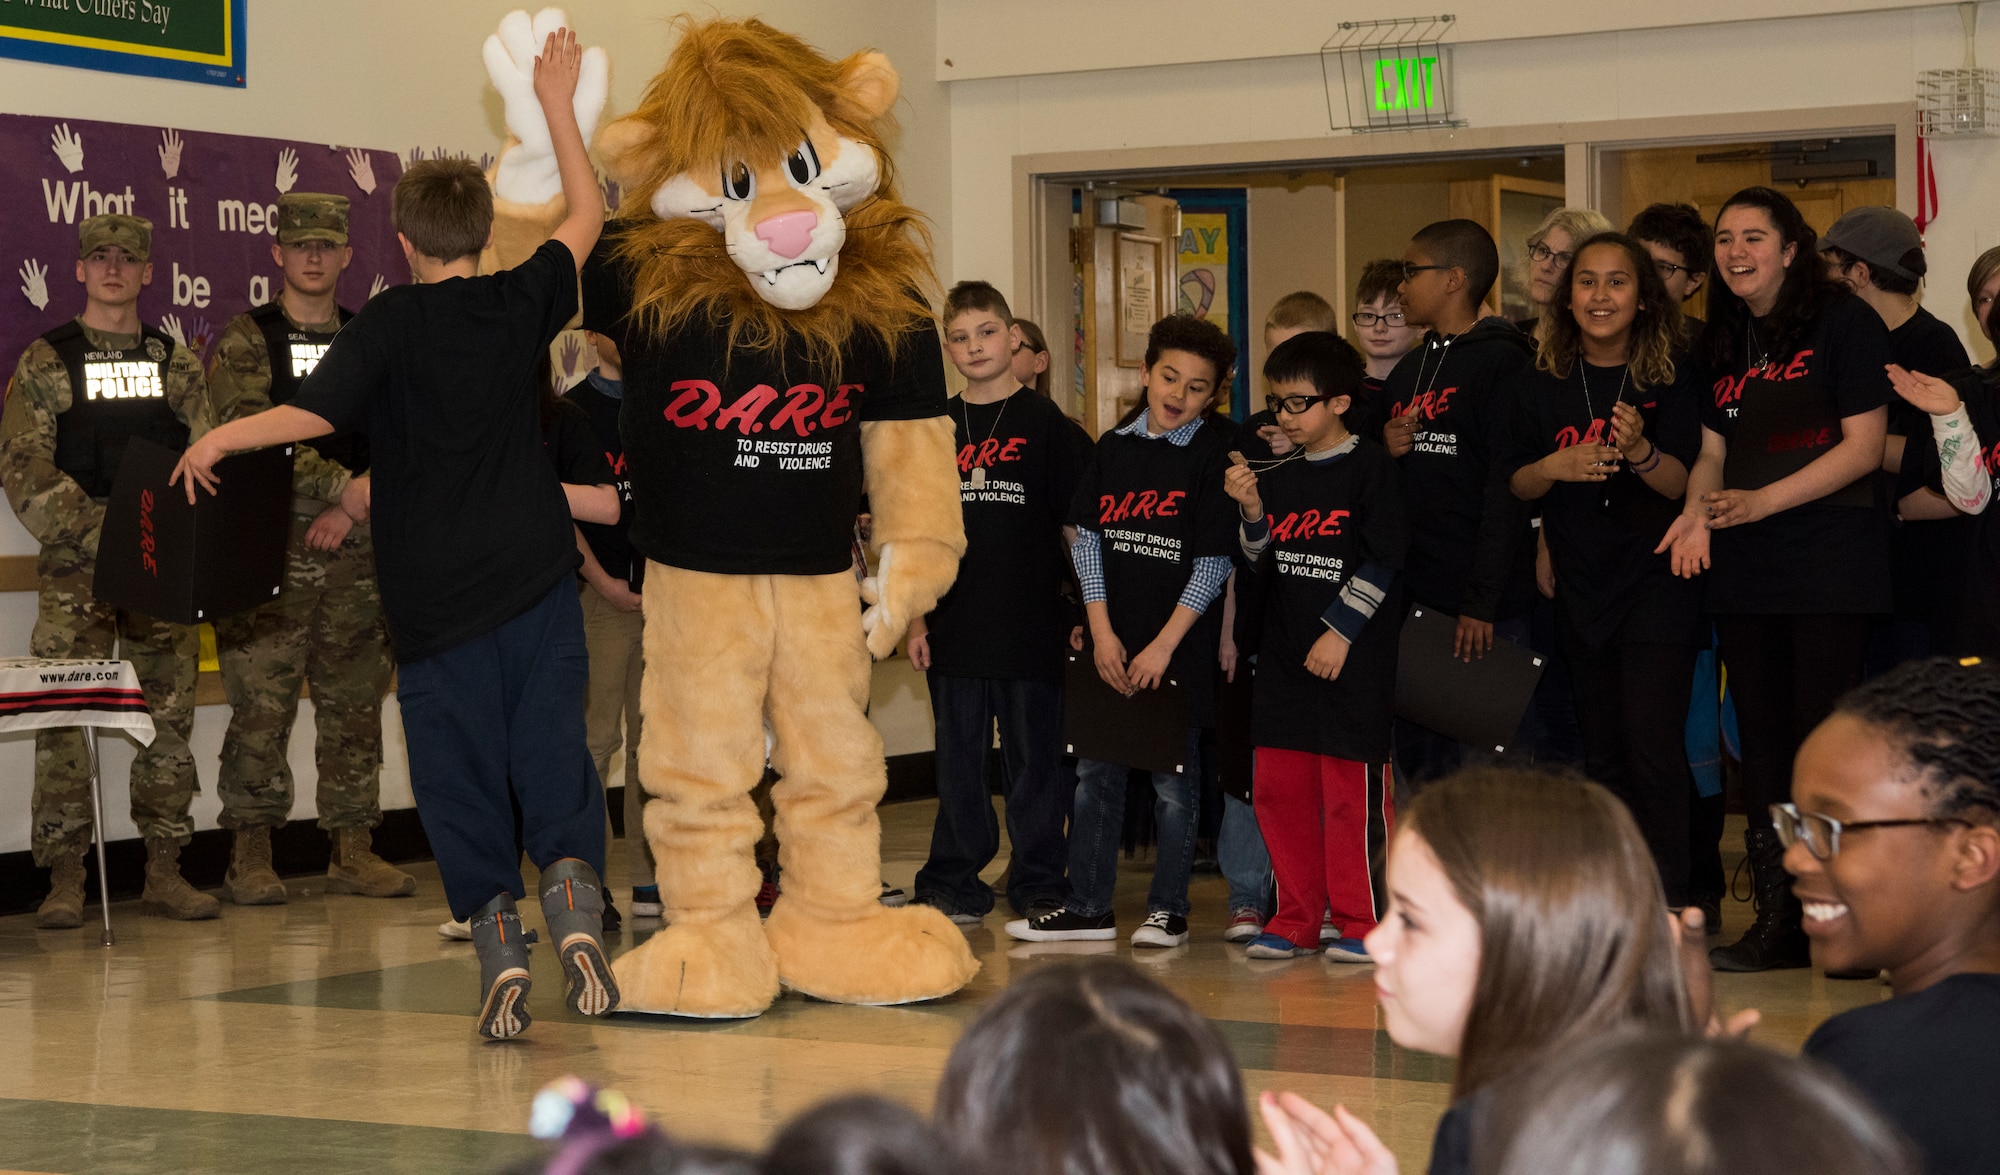 A student from the Drug Abuse Resistance Education program high-fives Daren the Lion at Ursa Major Elementary School at Joint Base Elmendorf-Richardson, Alaska, May 2, 2018. D.A.R.E. is a program designed to provide students with the knowledge and tools they need to resist drugs, alcohol and other high-risk behaviors.